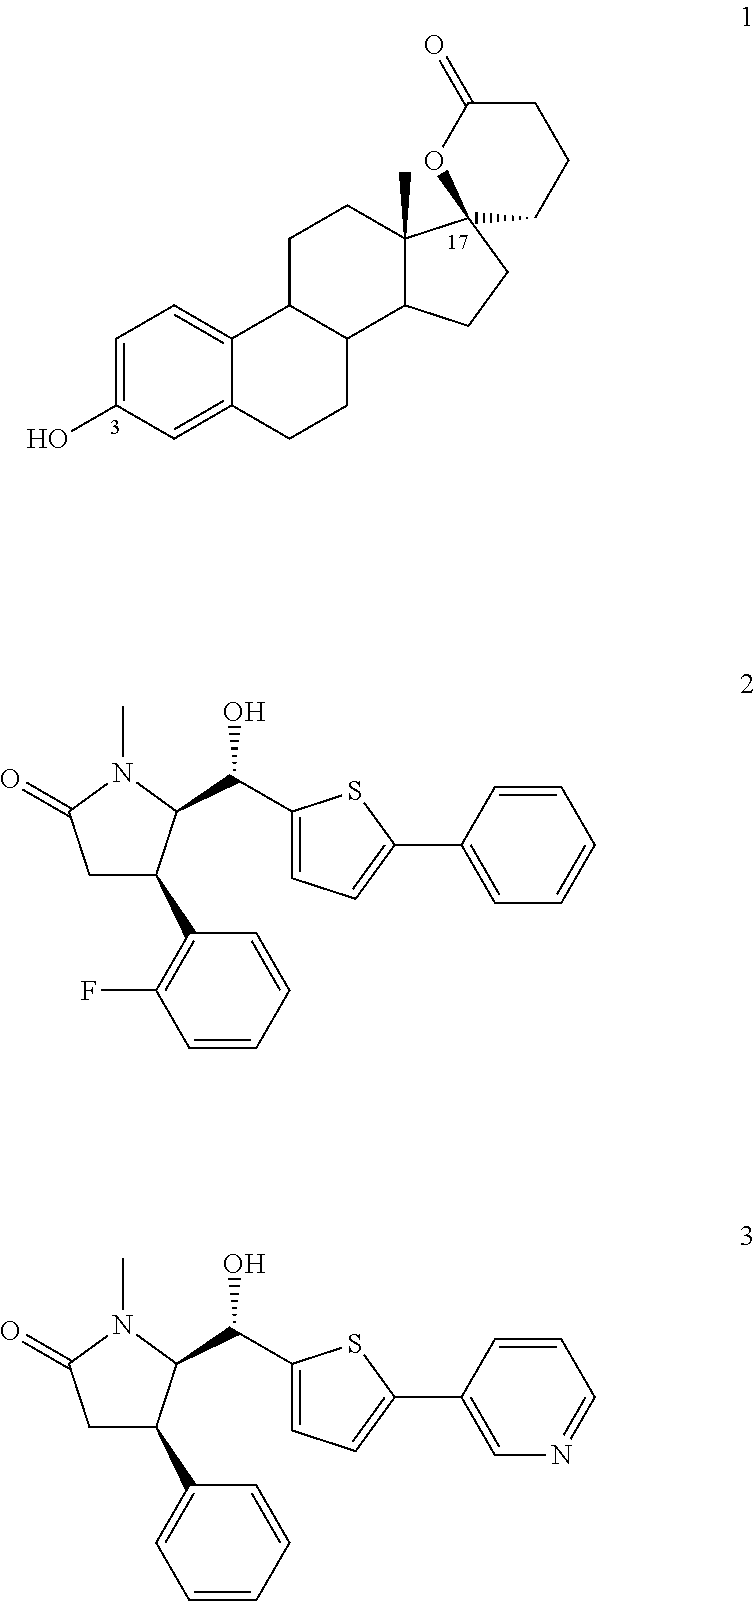 Biaryl derivatives as selective 17beta-hydroxysteroid dehydrogenase type 2 inhibitors